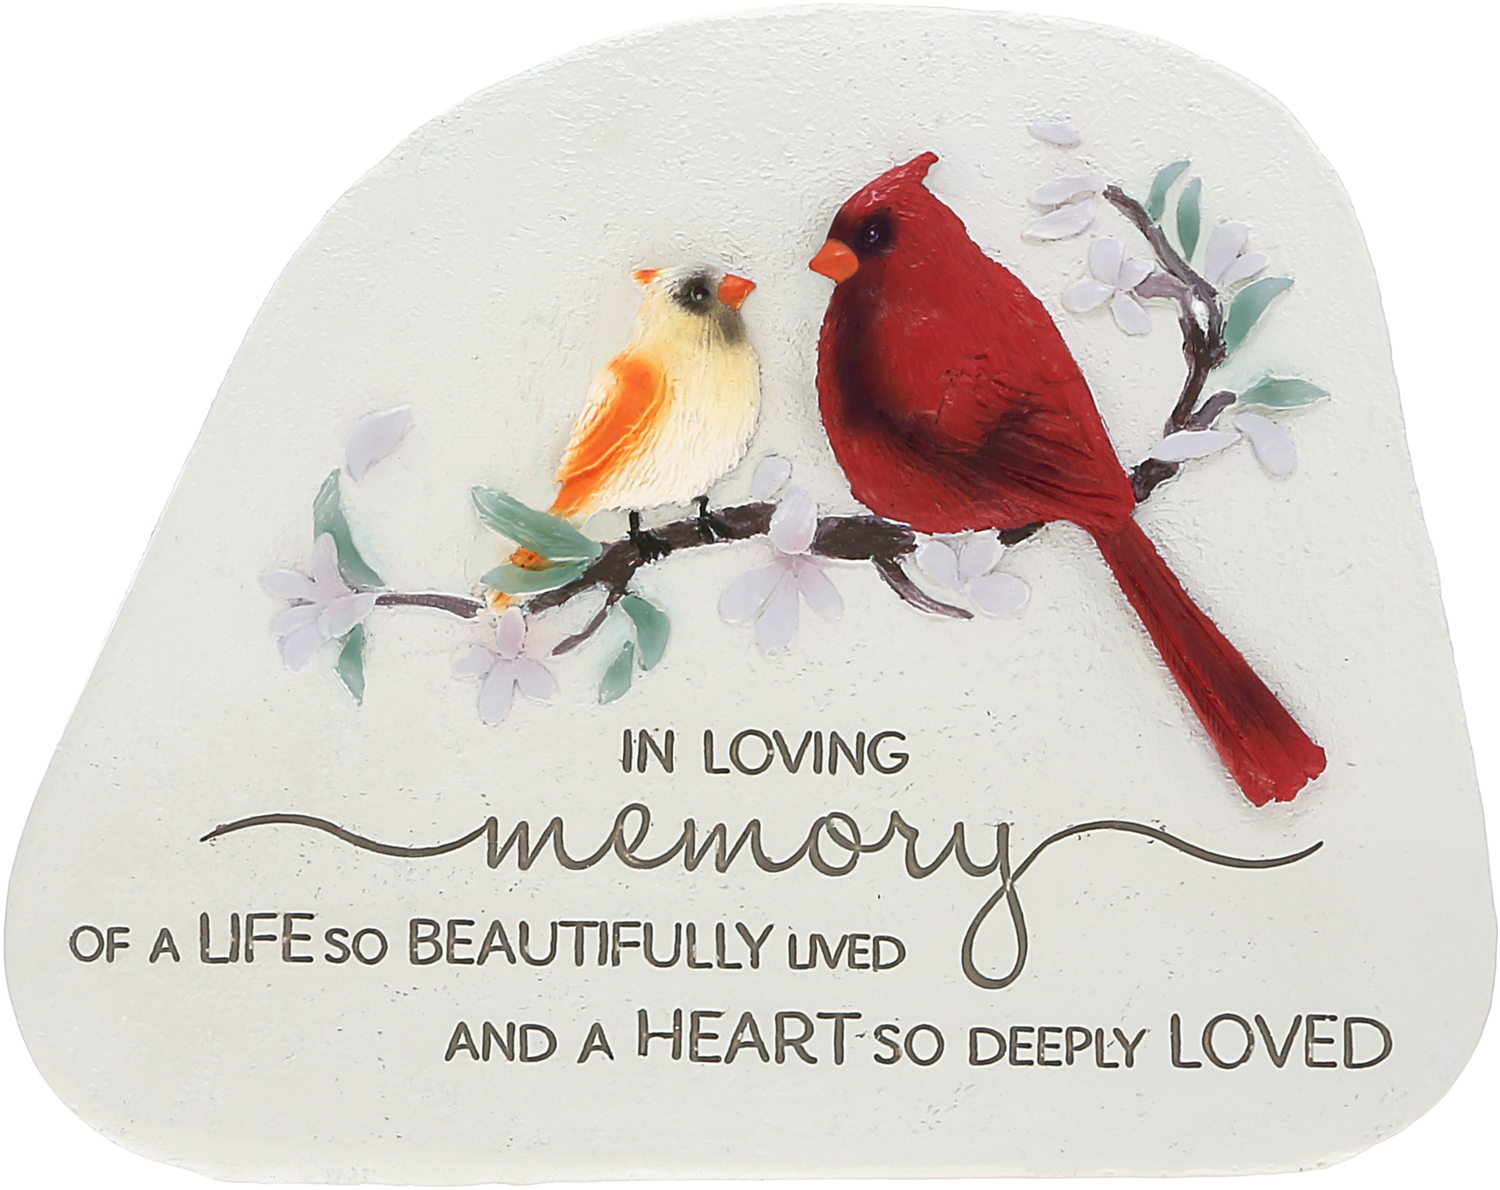 In Loving Memory by Always by Your Side - In Loving Memory - 5.5" Standing Memorial Stone